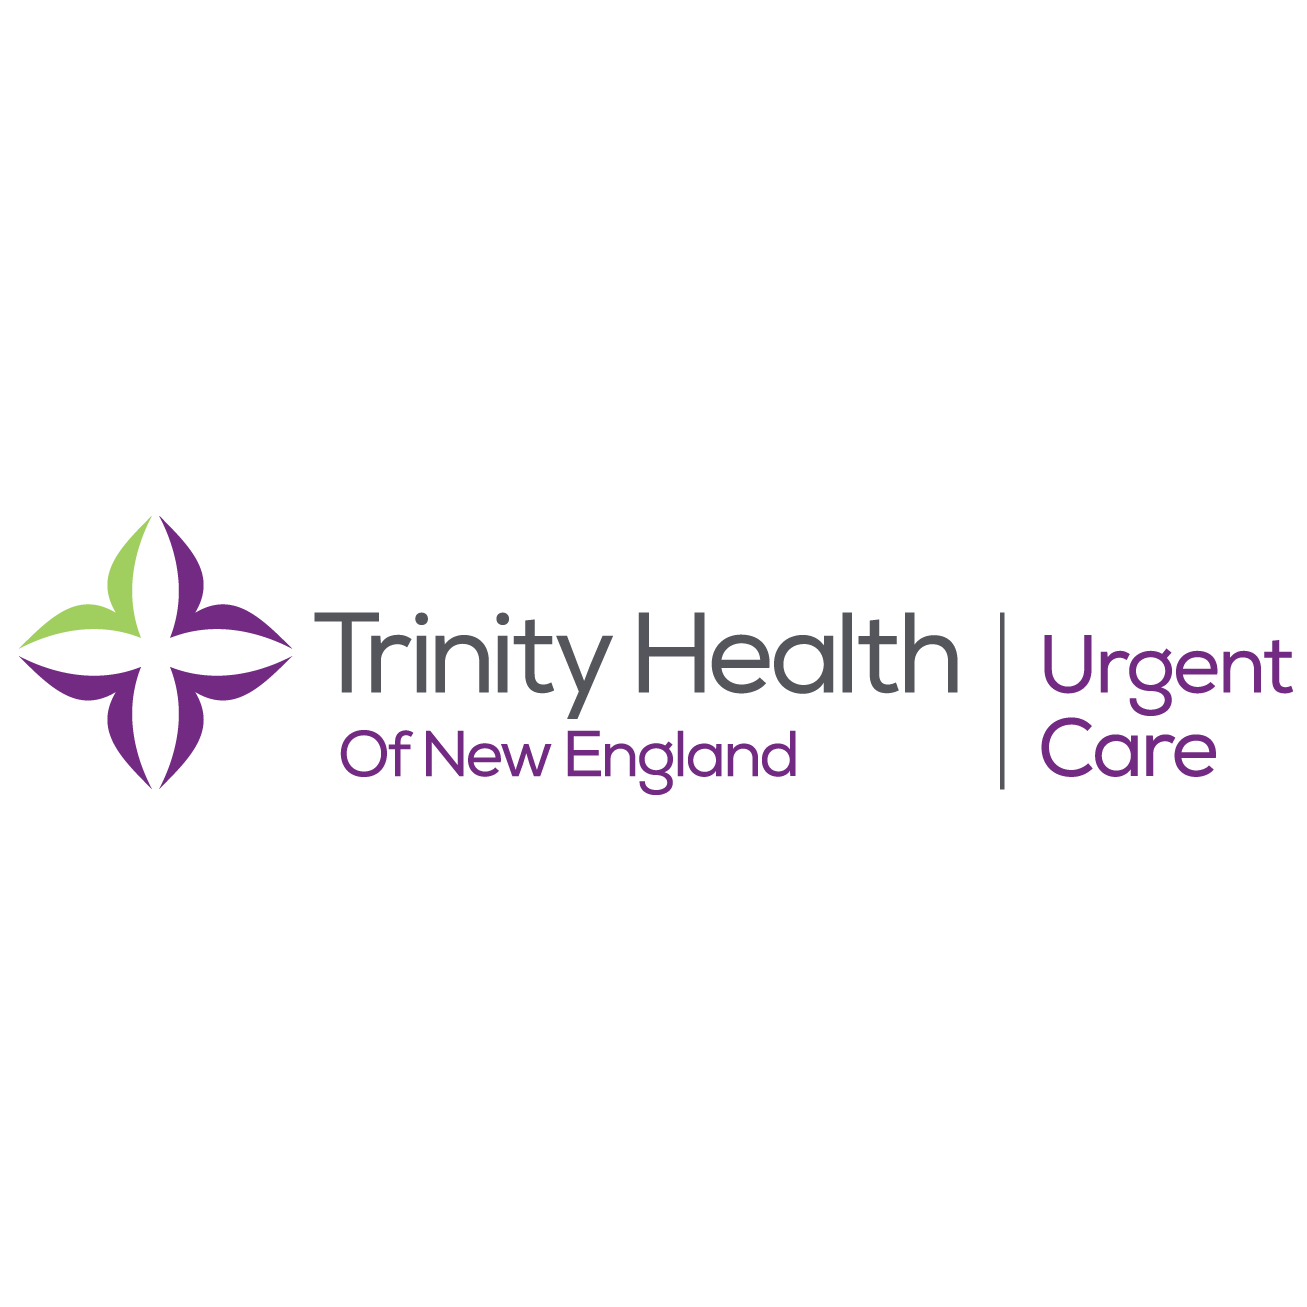 Trinity Health Of New England Urgent Care - Bloomfield - Bloomfield, CT 06002 - (860)900-0941 | ShowMeLocal.com